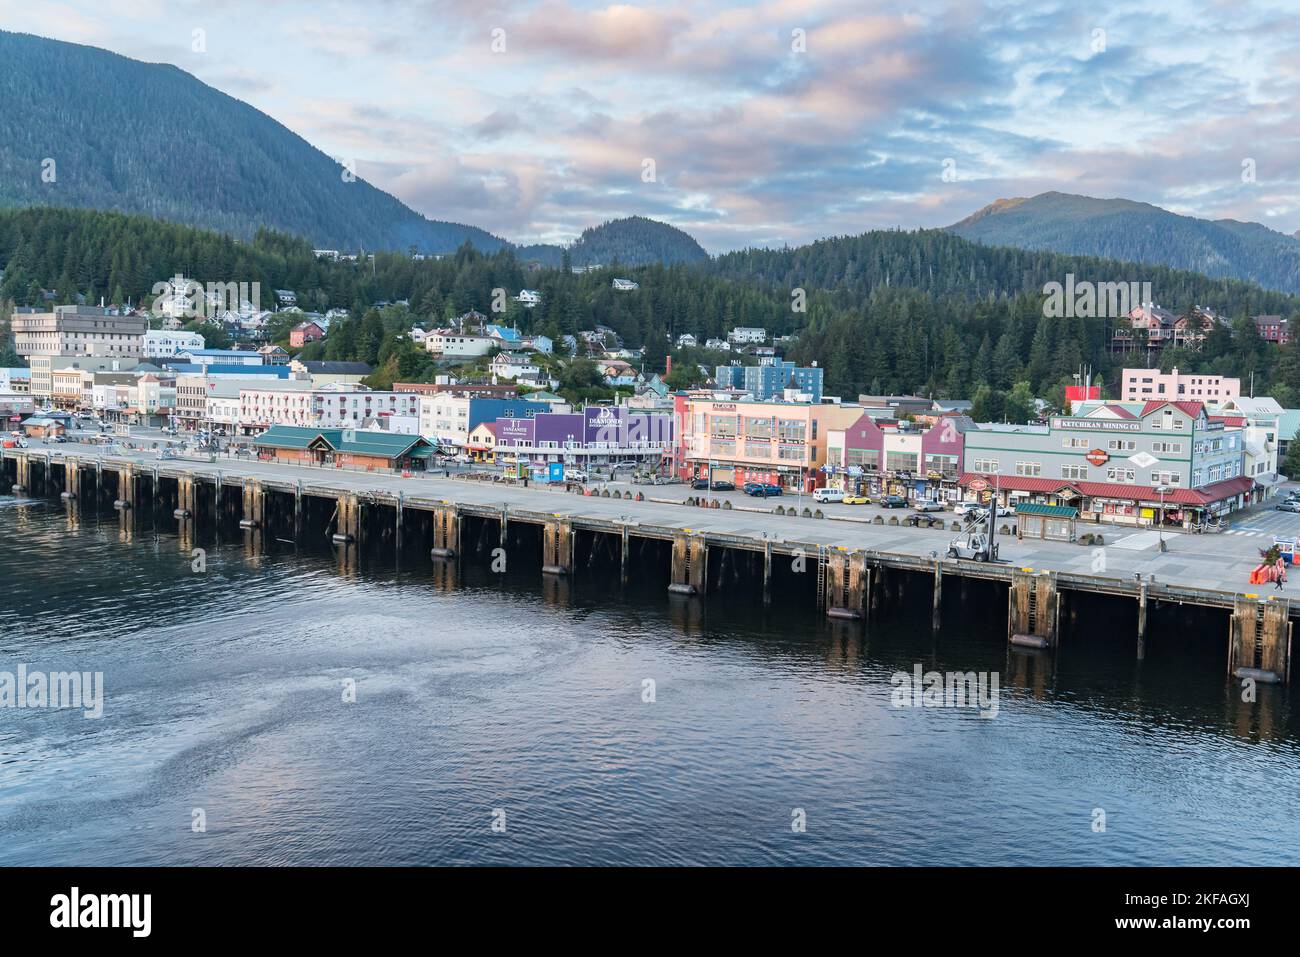 Ketchikan, AK - September 9, 2022: City skyline of the port of Ketchikan, Alaska from the waterfront Stock Photo